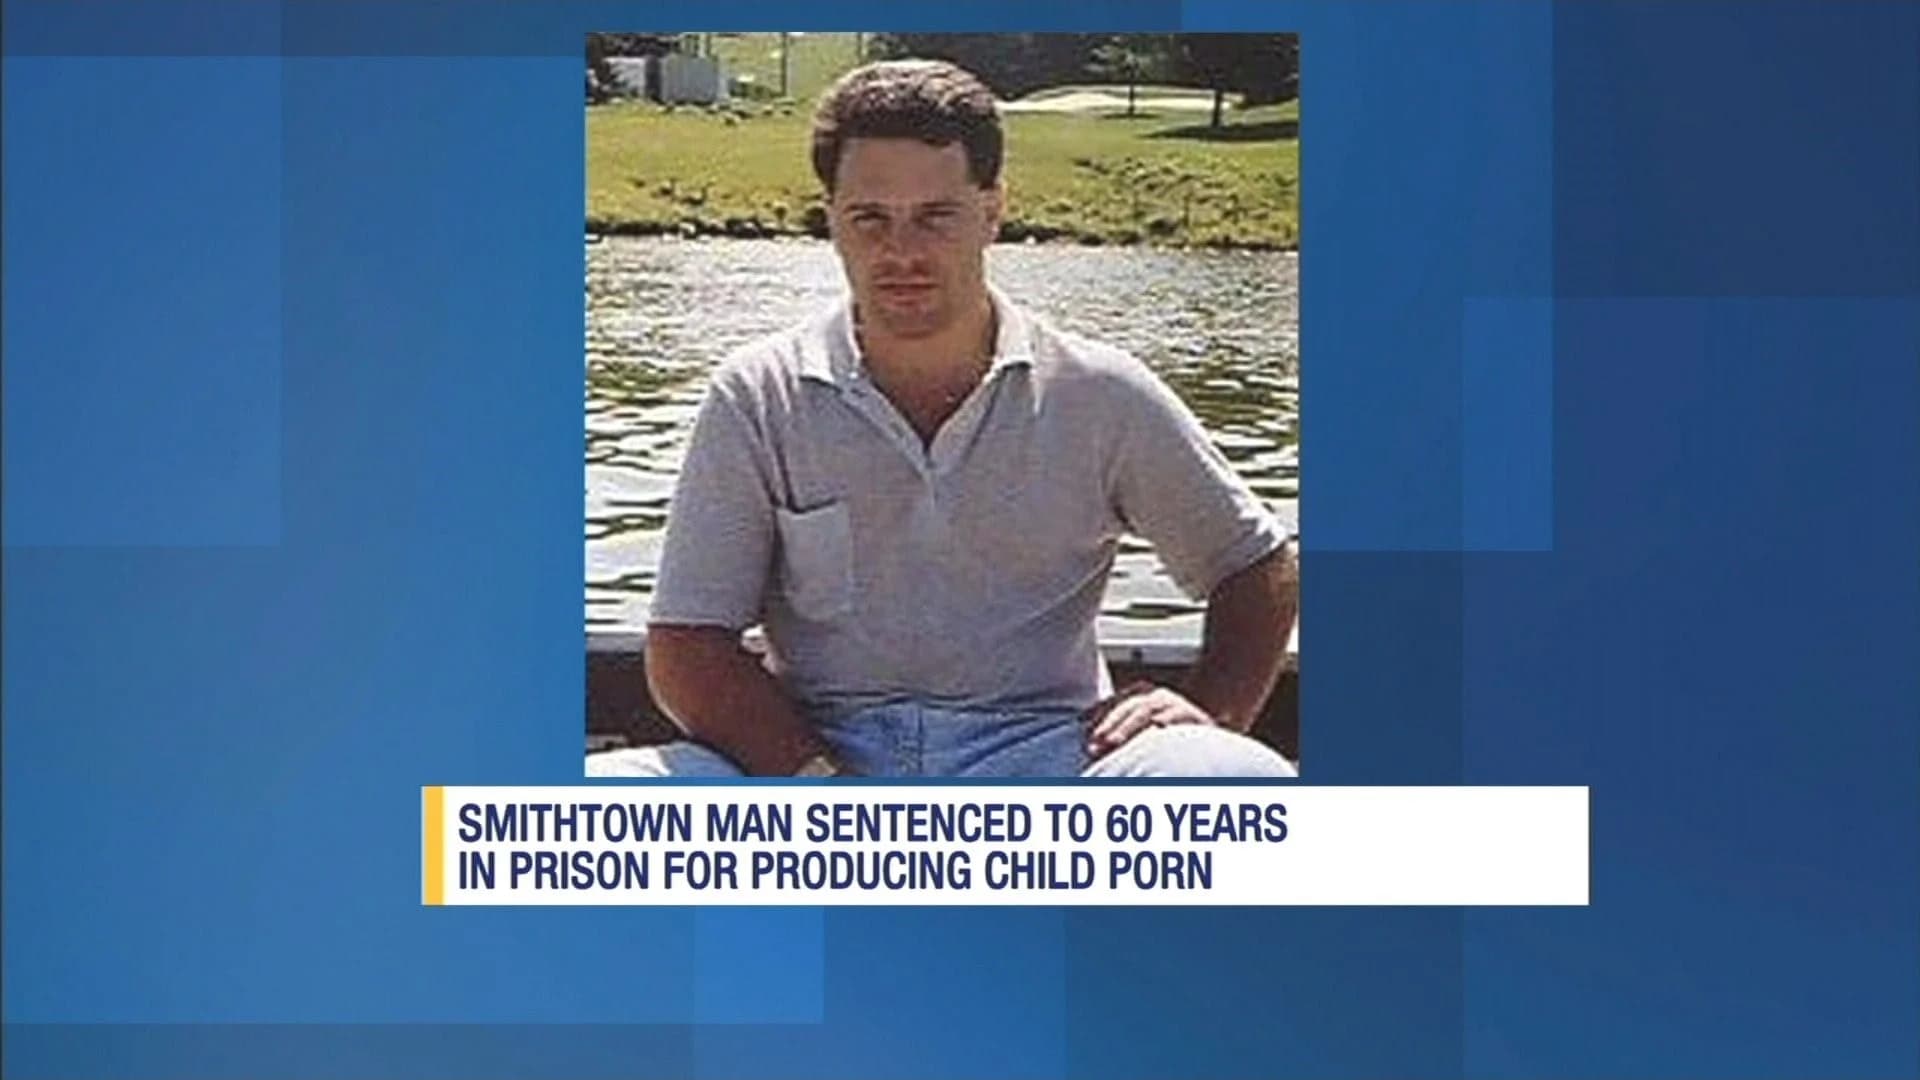 Smithtown man gets 60 years for producing child porn